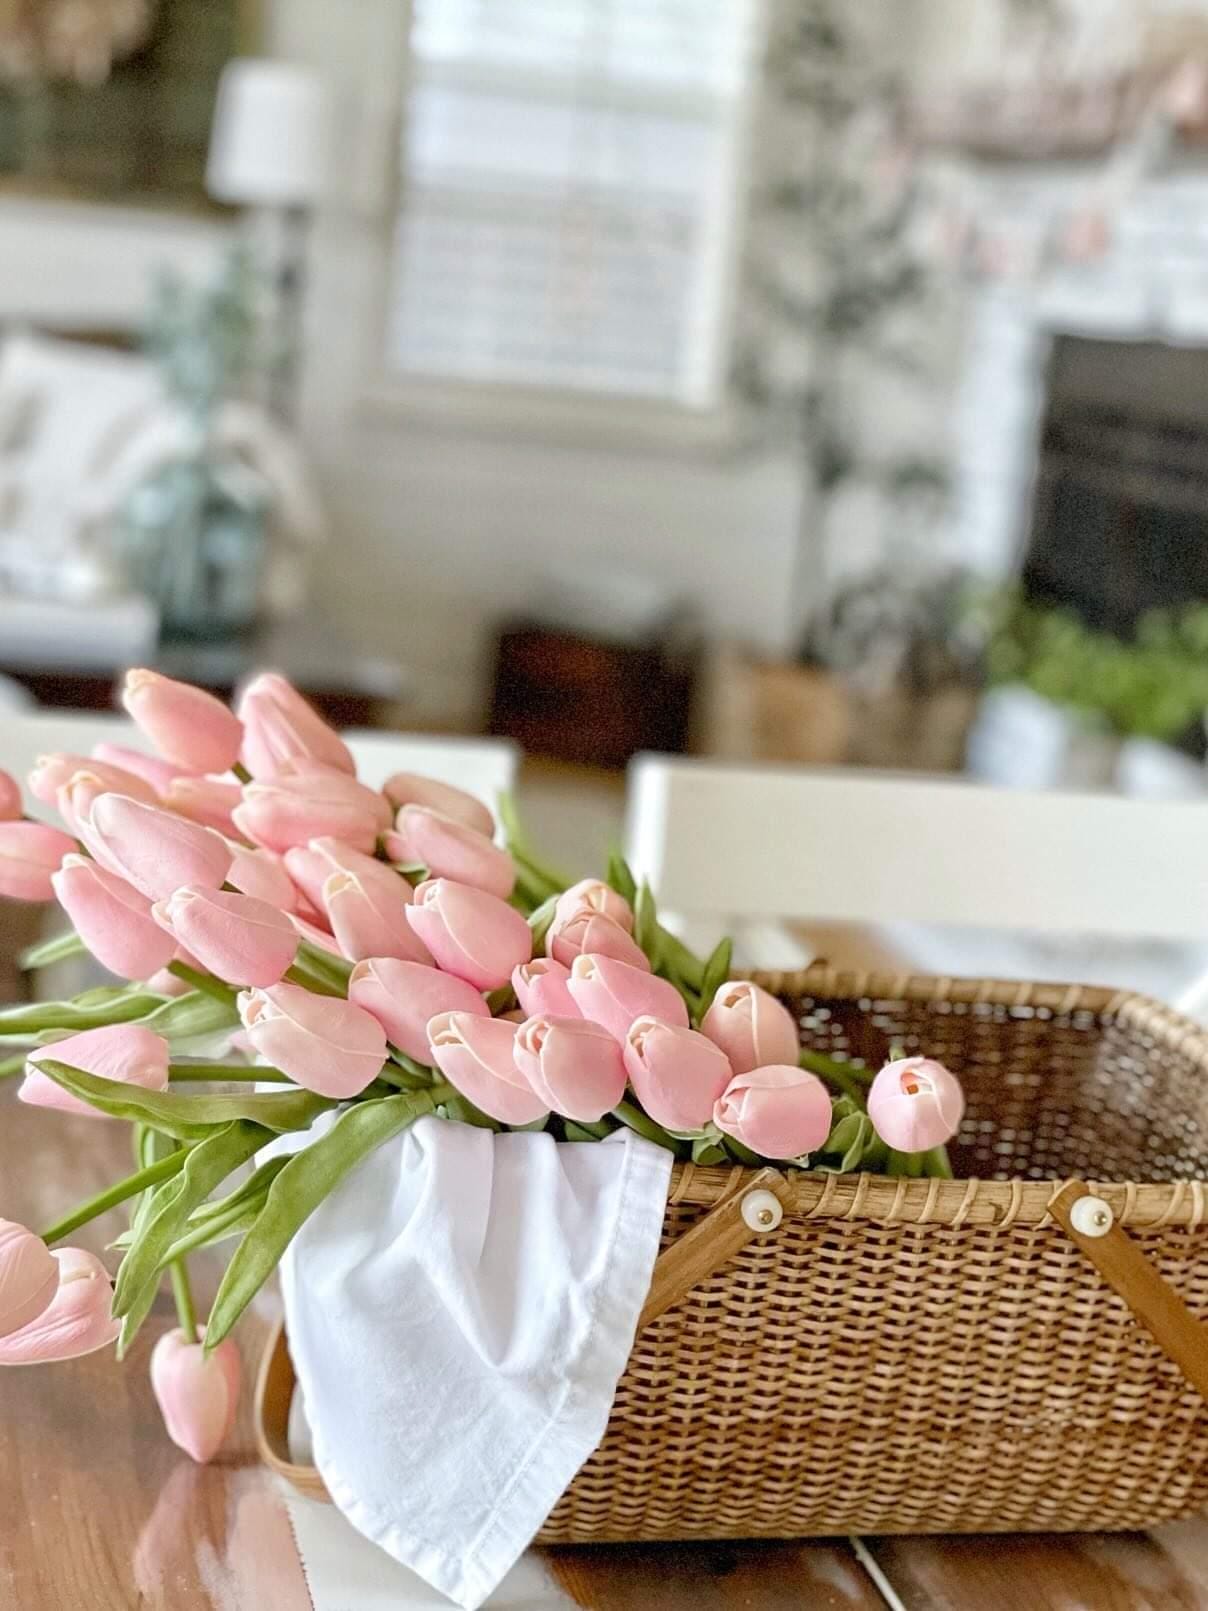 easy ways to decorate for spring from Pasha of Pasha is Home